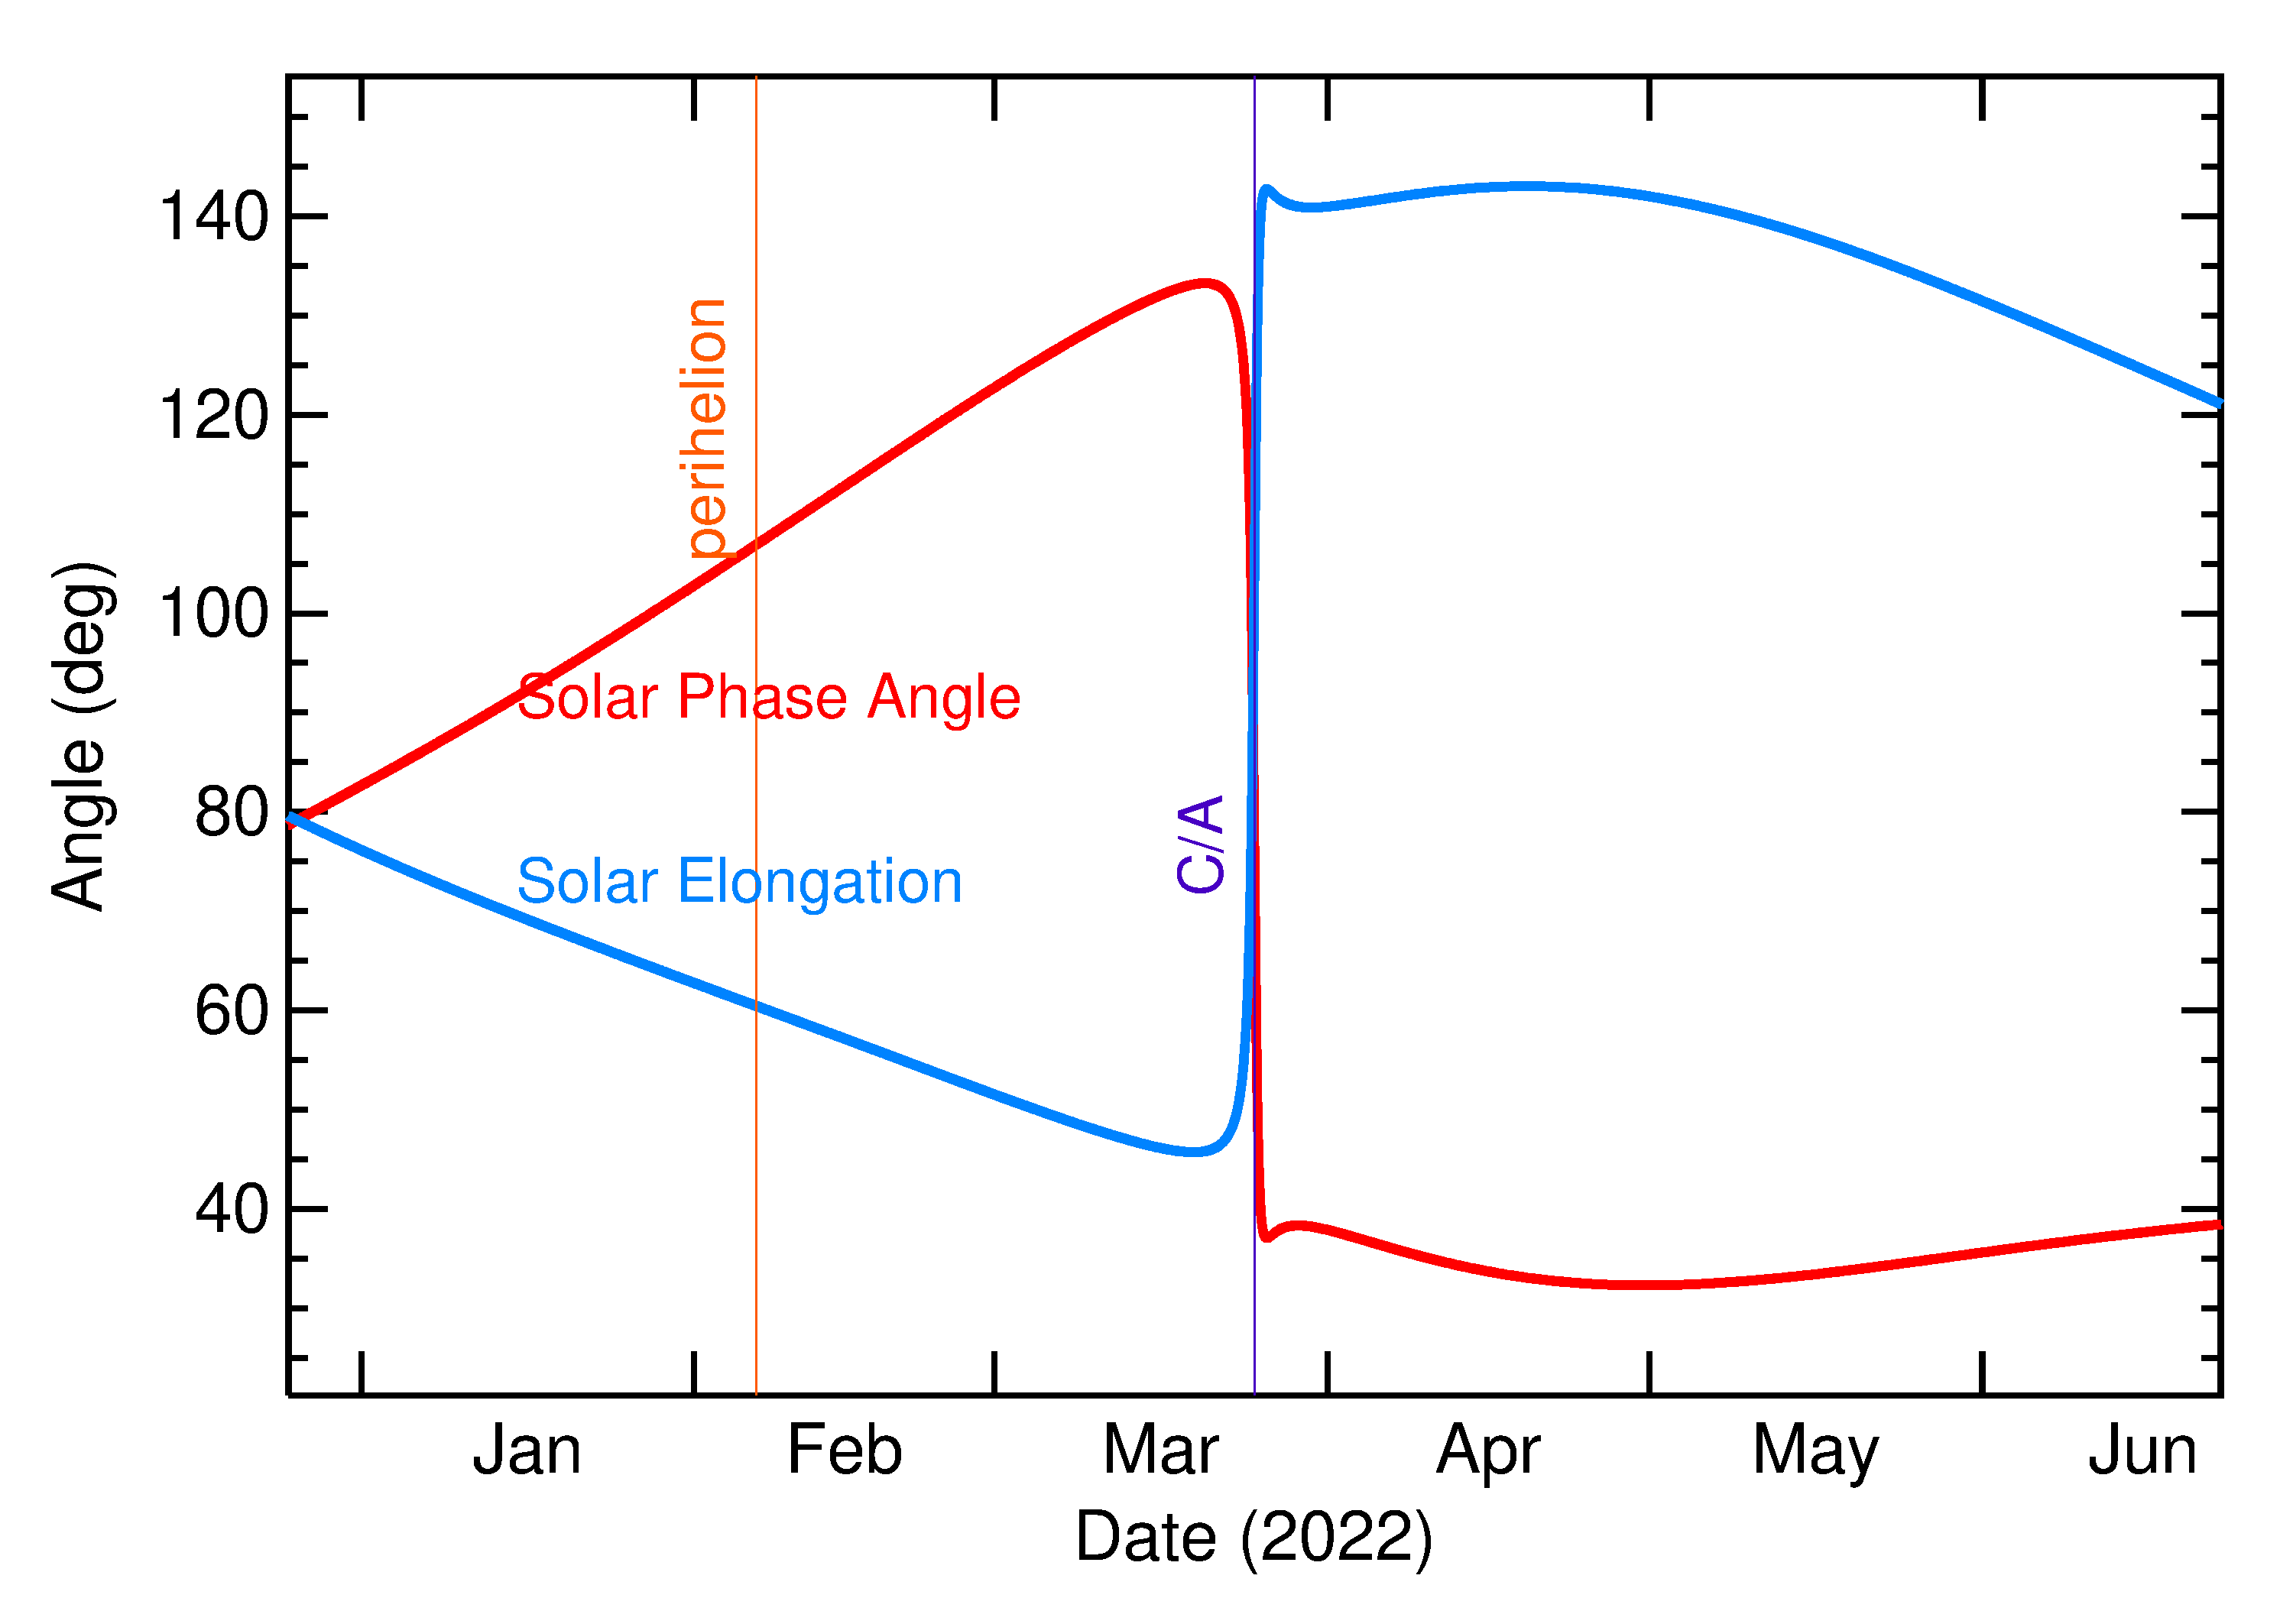 Solar Elongation and Solar Phase Angle of 2022 FZ3 in the months around closest approach